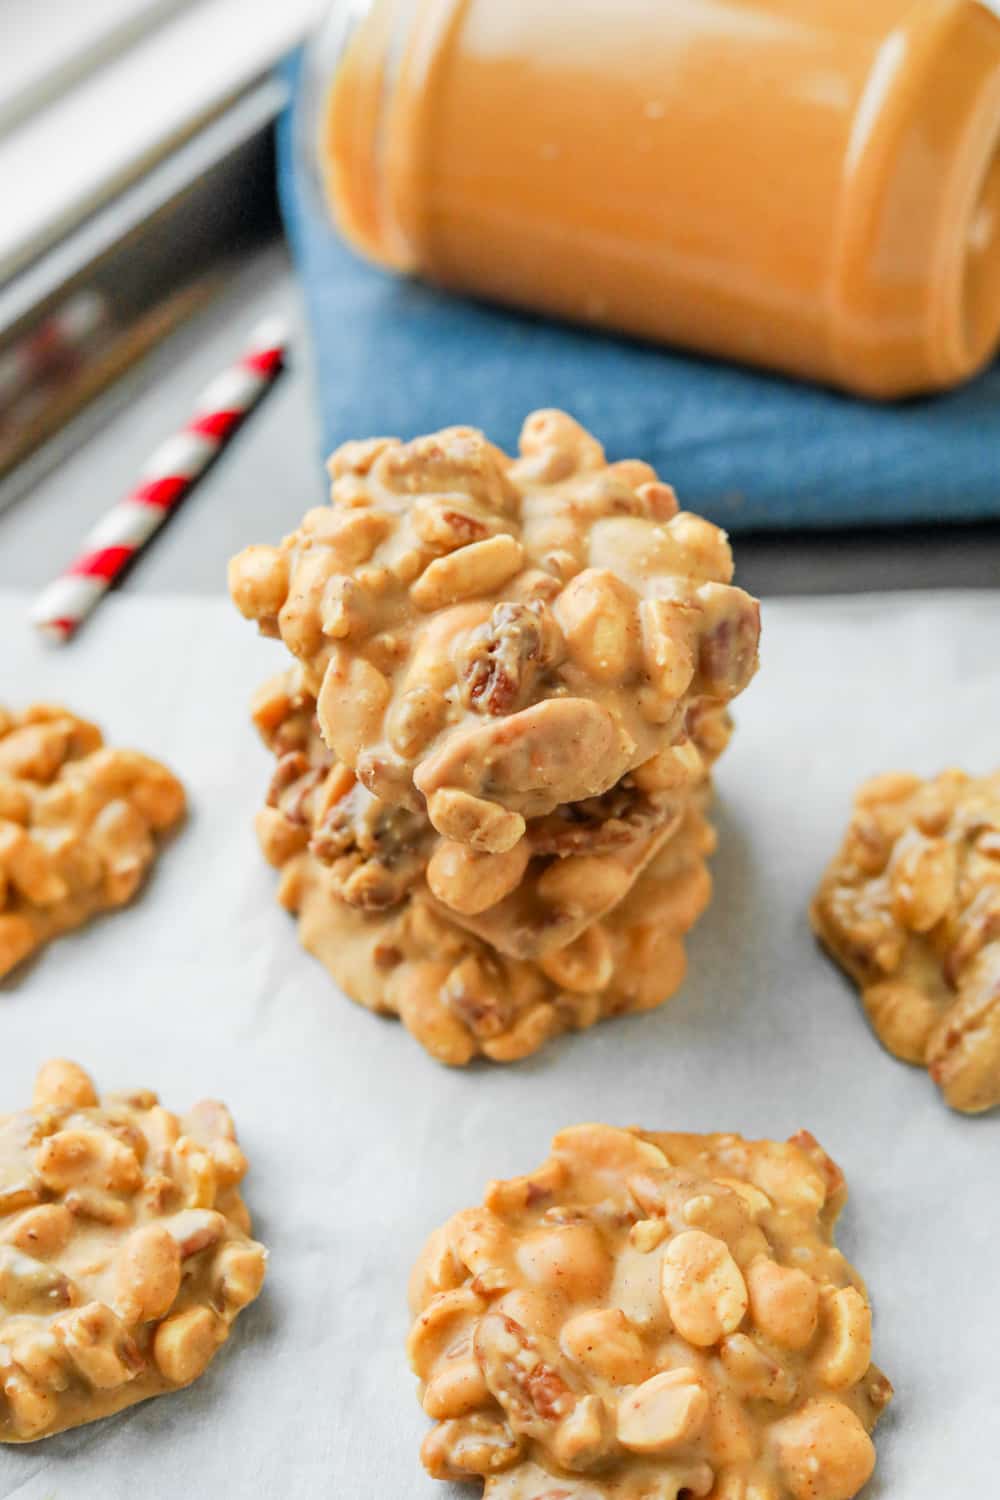 Three peanut butter nut clusters stacked on top of one another on a baking sheet lined with parchment paper.